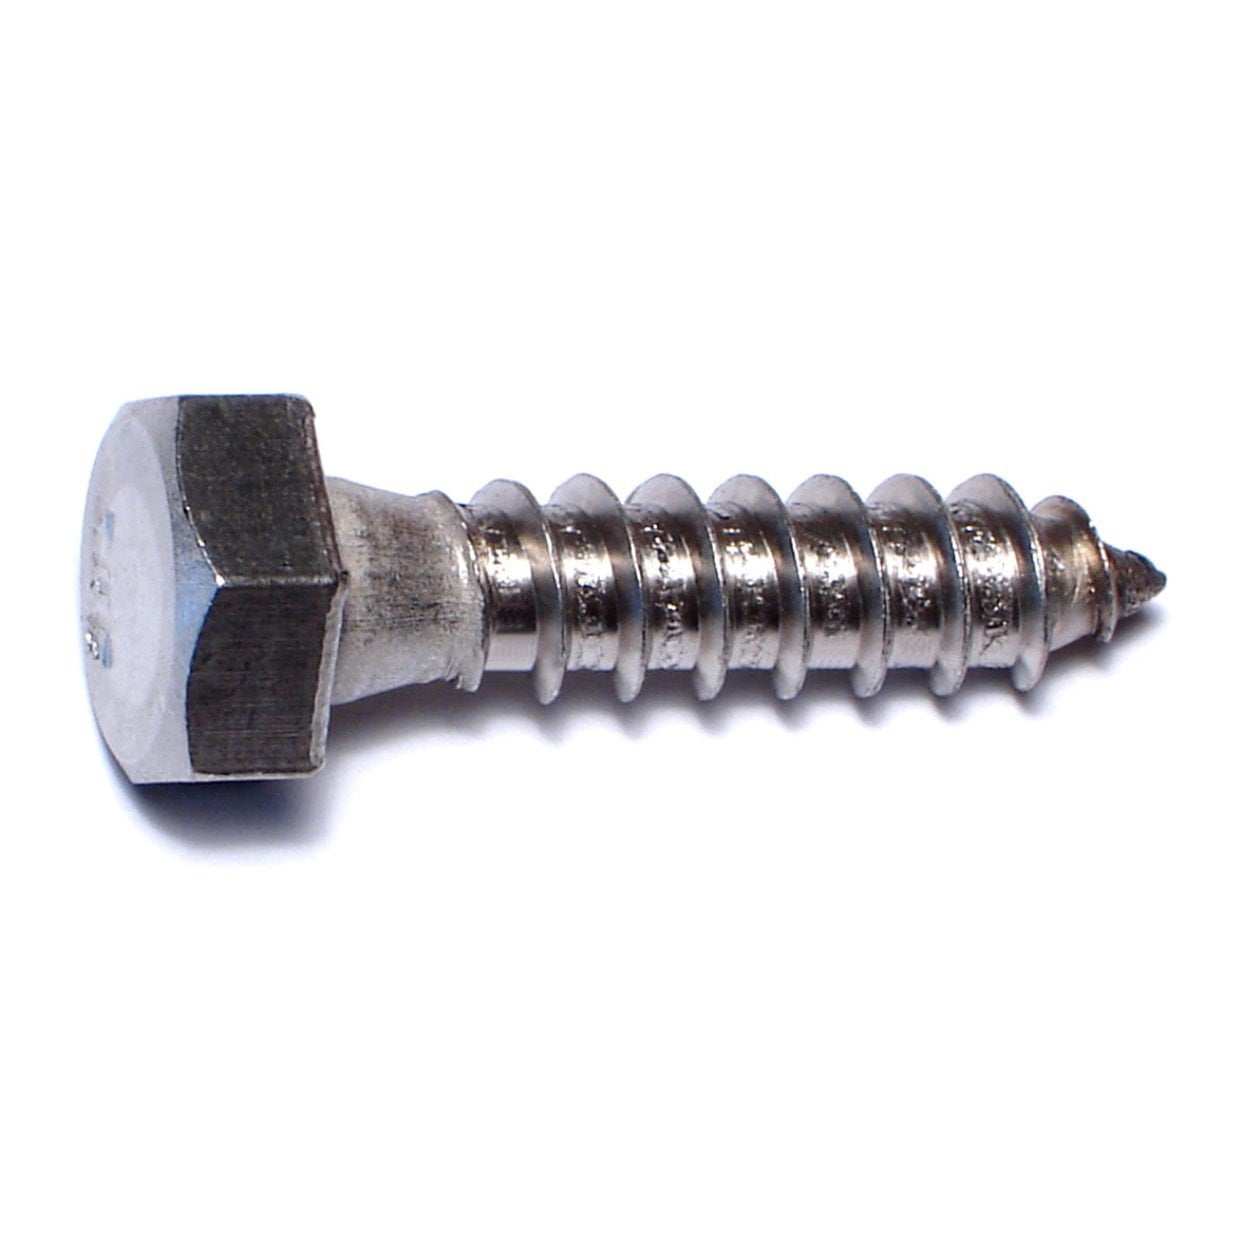 5/16-18 Thread Size 18-8 Stainless Steel Hex Head Screw 1-1/4 Long